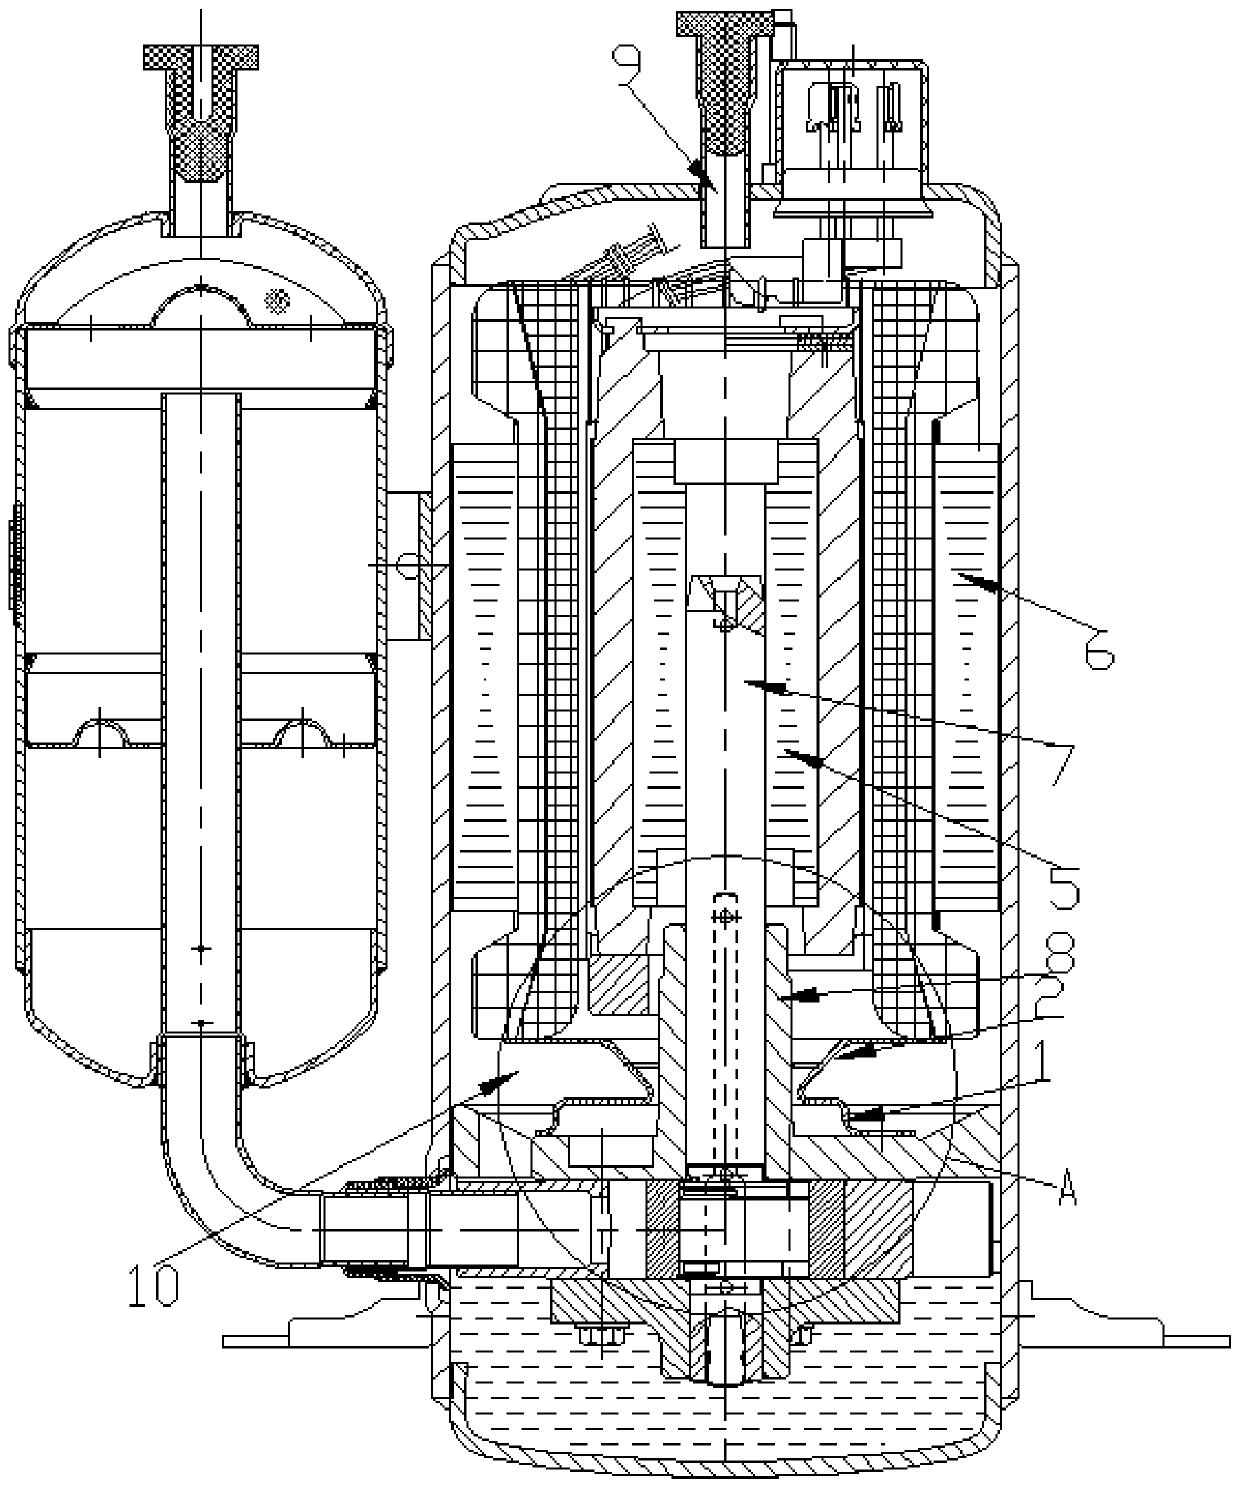 Silencer structure, compressor and air conditioner